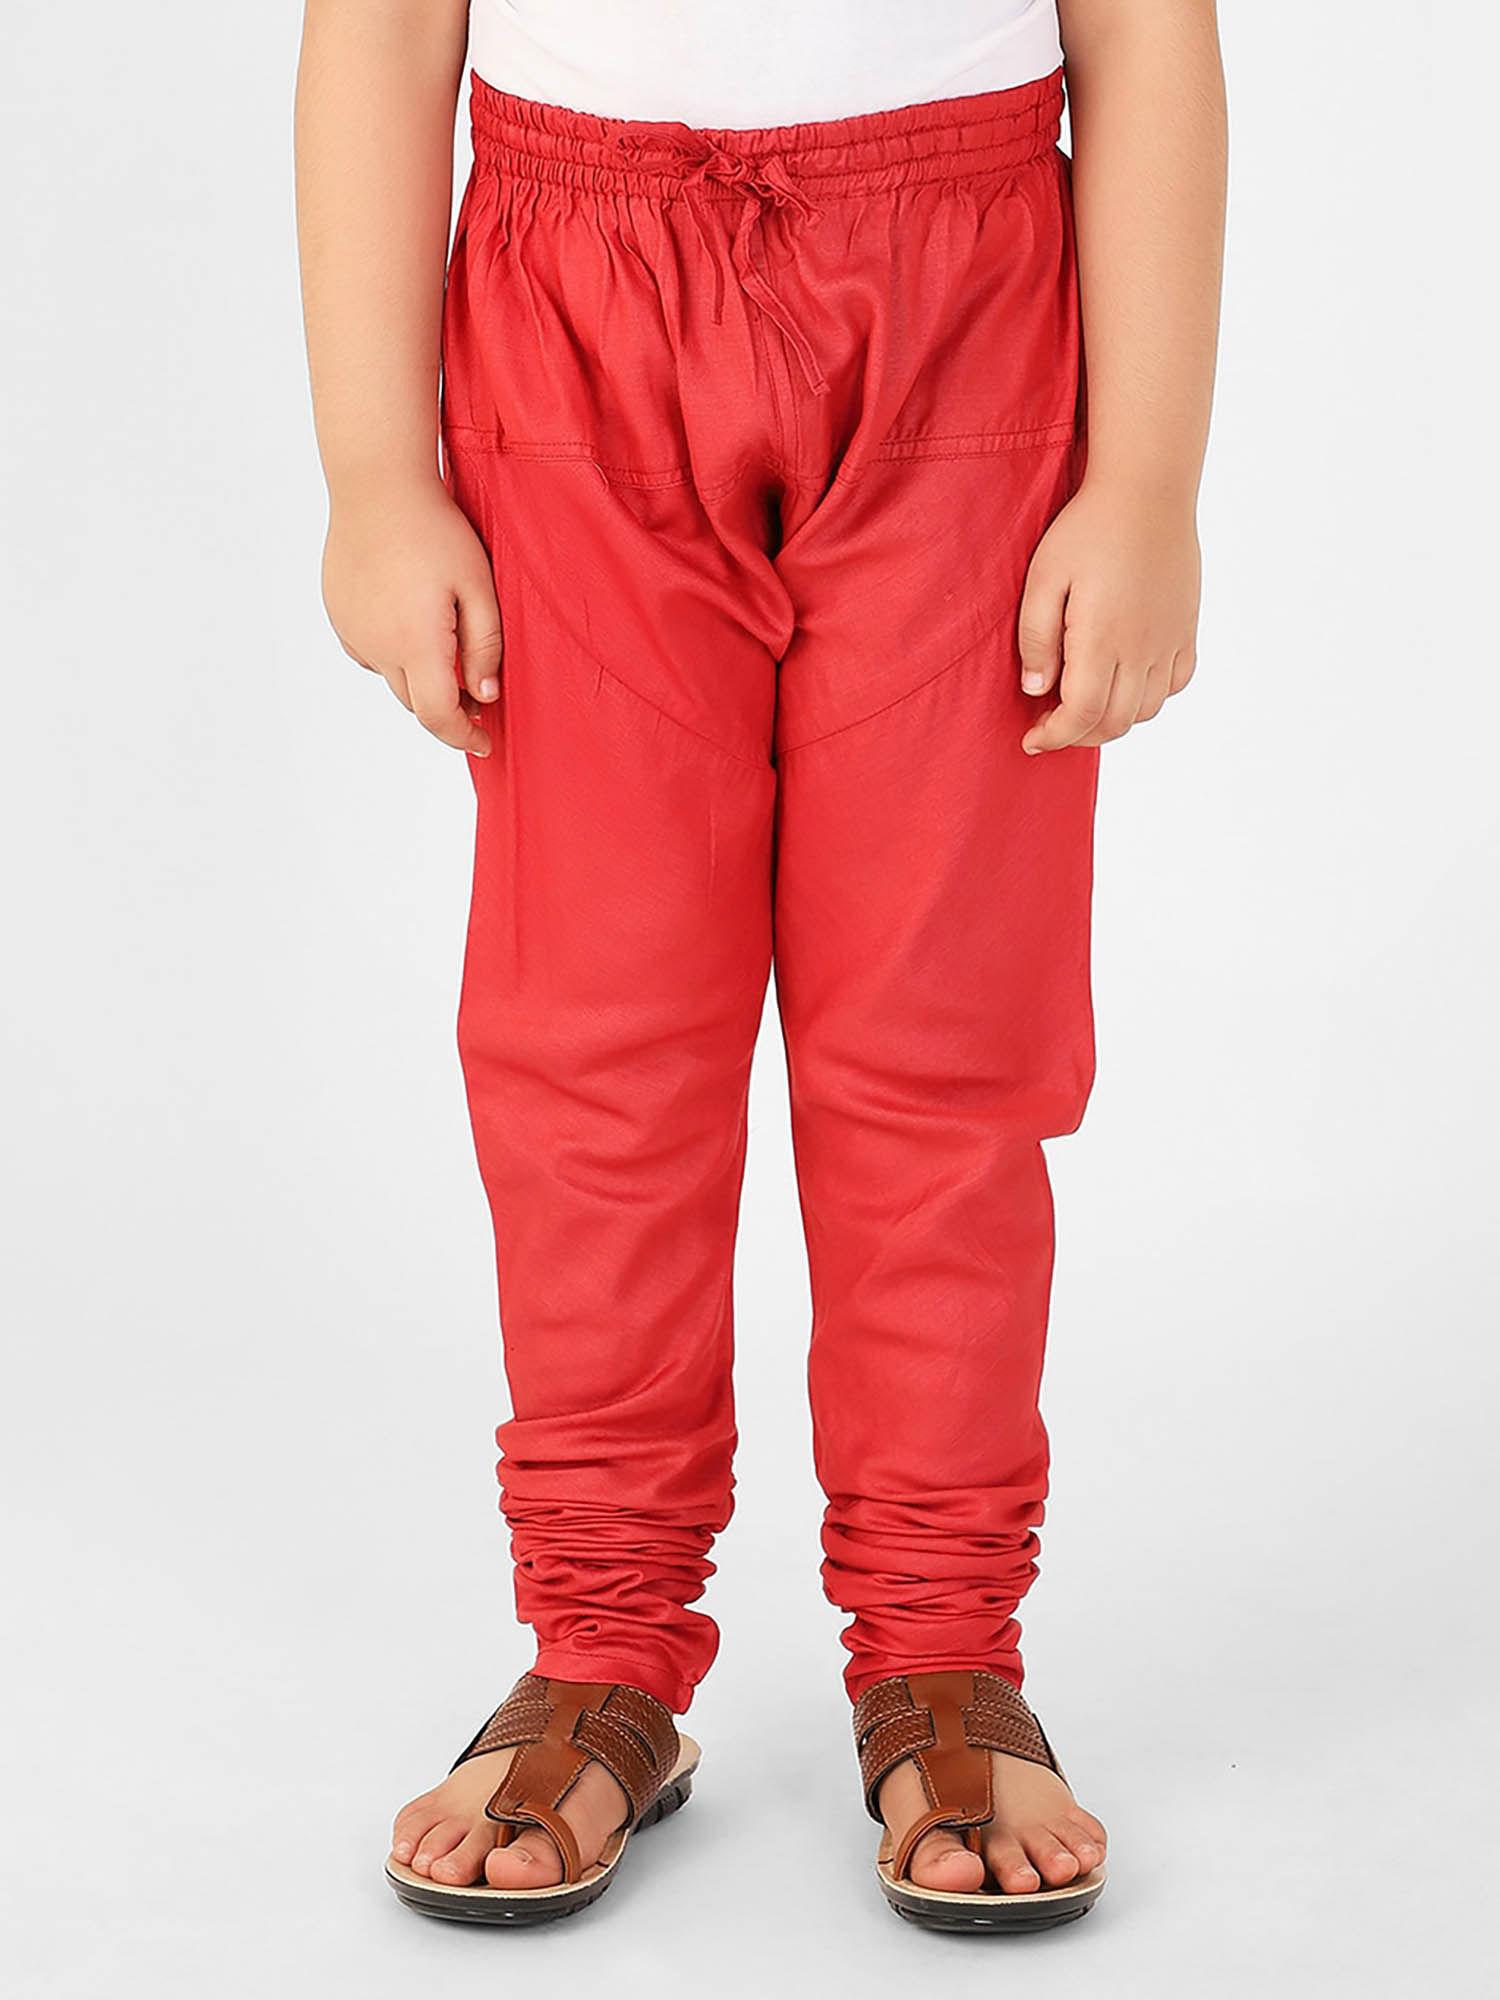 boys-red-pant